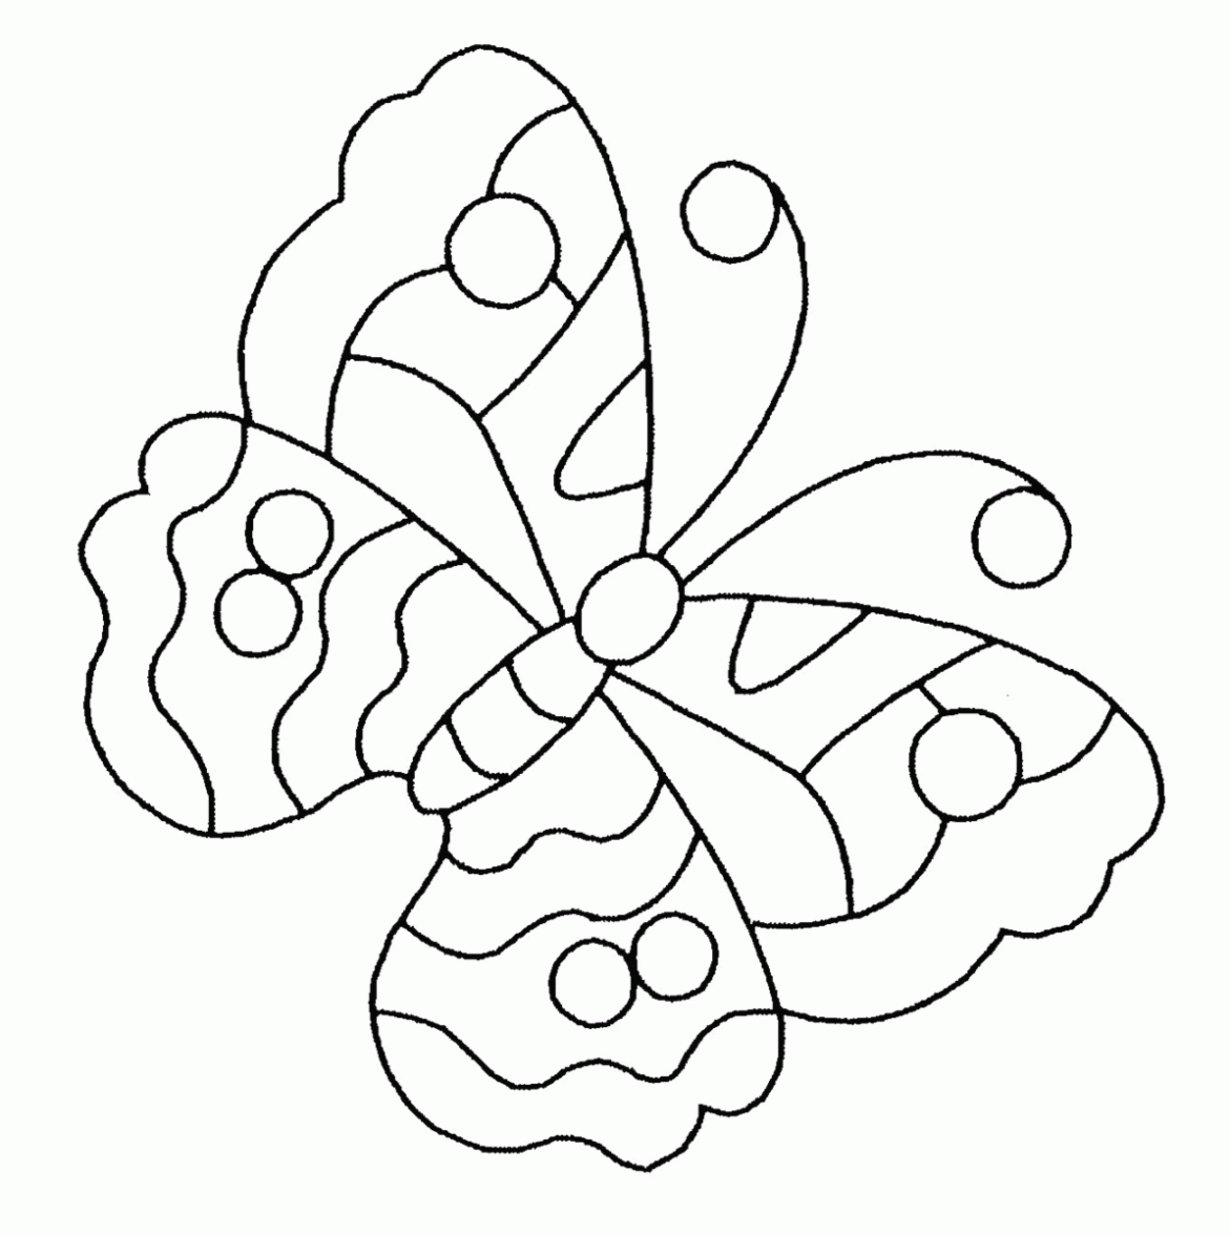 butterflies to color free printable images of butterflies printable 360 degree color butterflies to free 